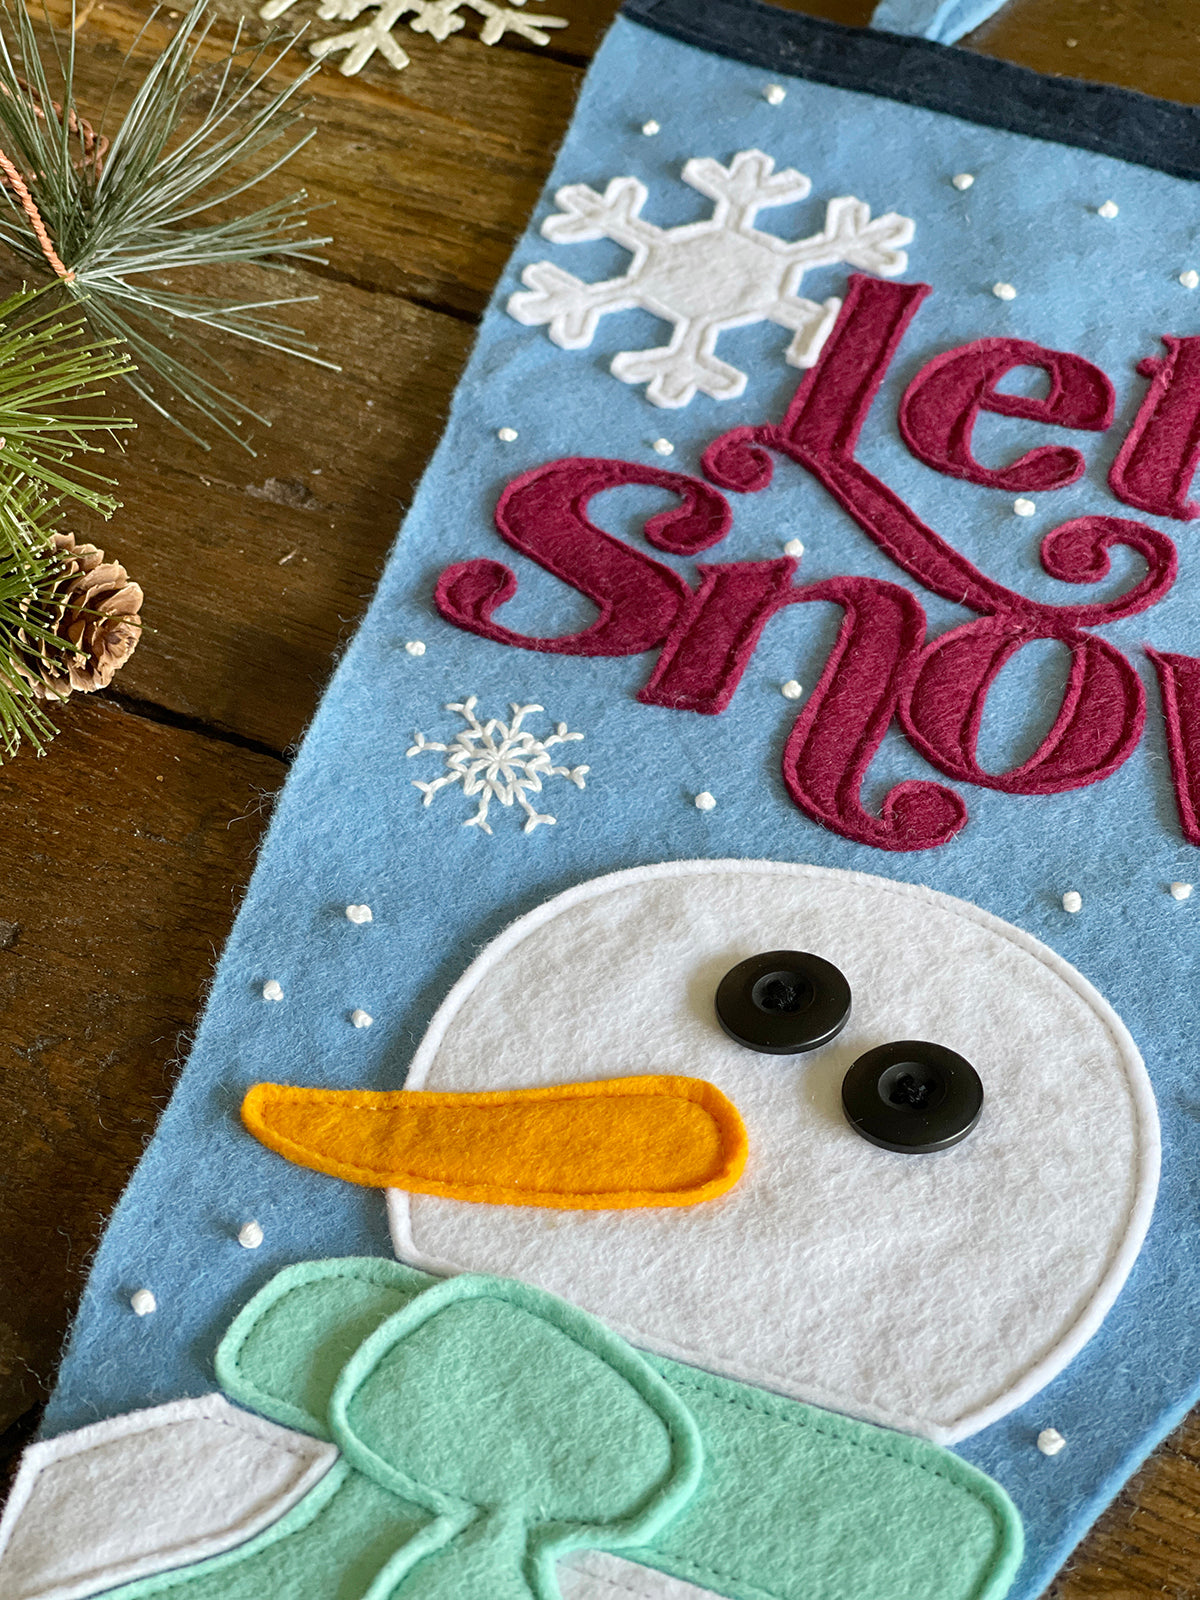 A close up photo of a light blue felt pennant on a wooden table. The pennant has red lettering spelling 'Let it snow' and a white snowman with a mint scarf sewn to the backing. Small white beads have been sewn to the backing.